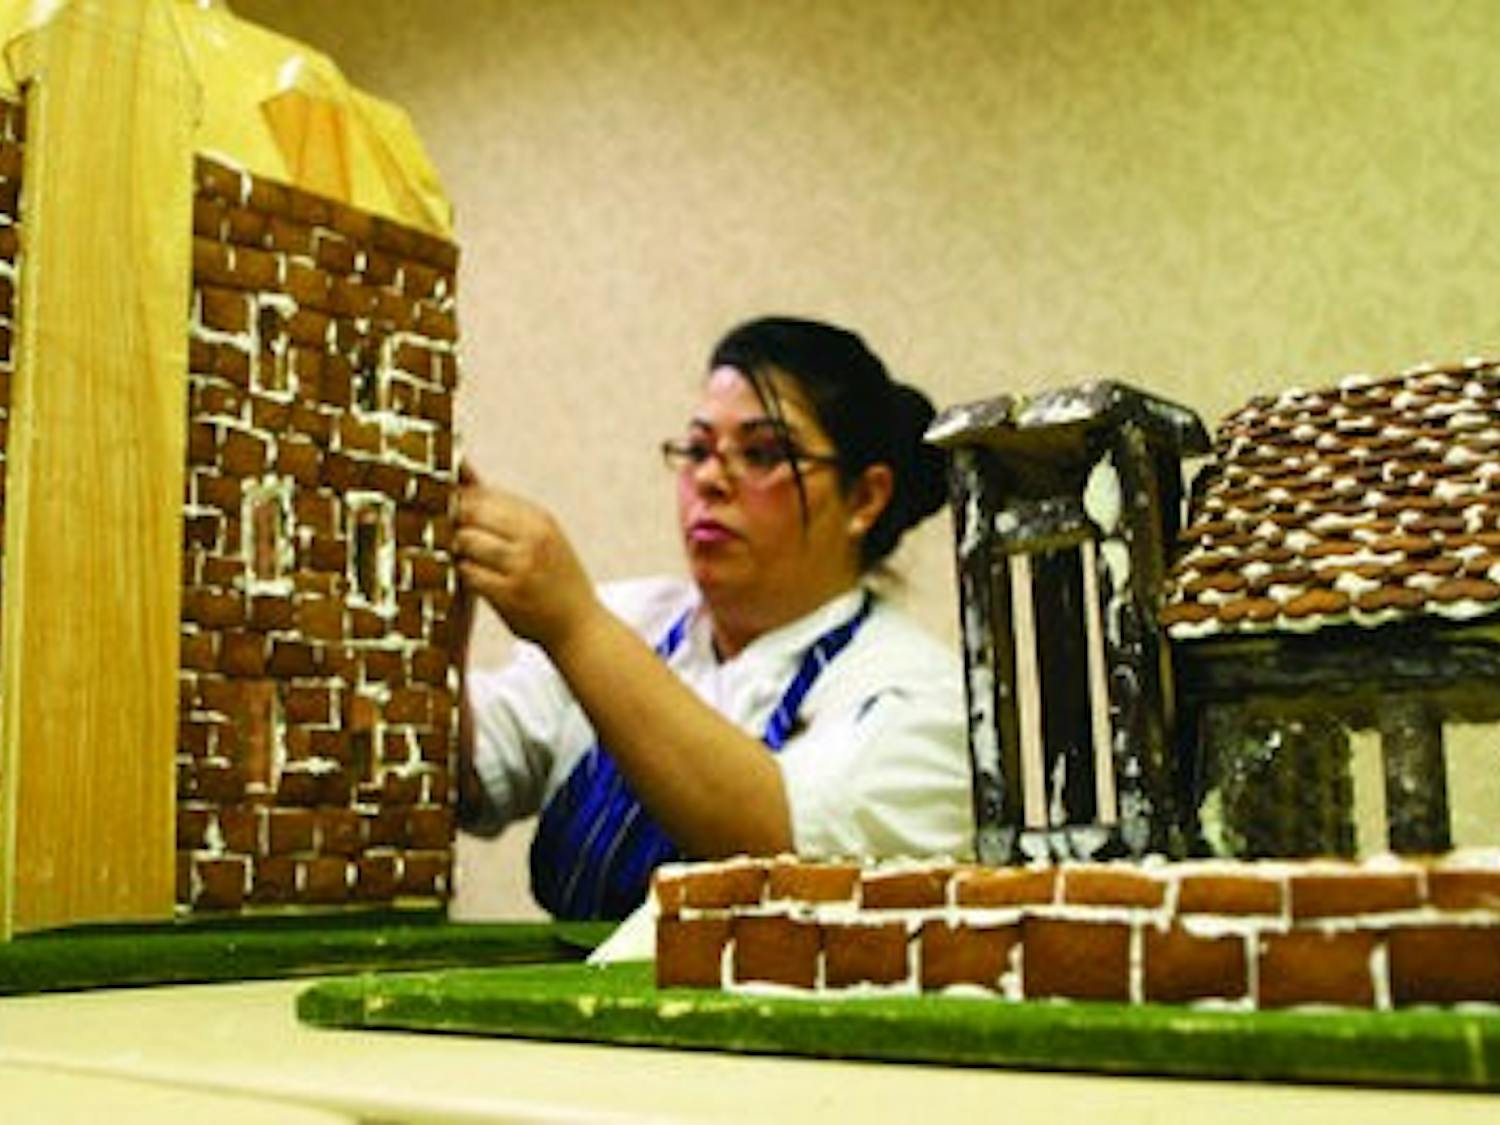 Chef Adelle Bonilla leads a team to create an Auburn gingerbread village masterpiece each year. Last year she used 90 eggs, 80 pounds of flour, 30 pounds of sugar, 7 pounds of molasses and 5 pounds of ground sugar, cinnamon and nutmeg to finish the job. (Rebecca Croomes / ASSISTANT PHOTO EDITOR)